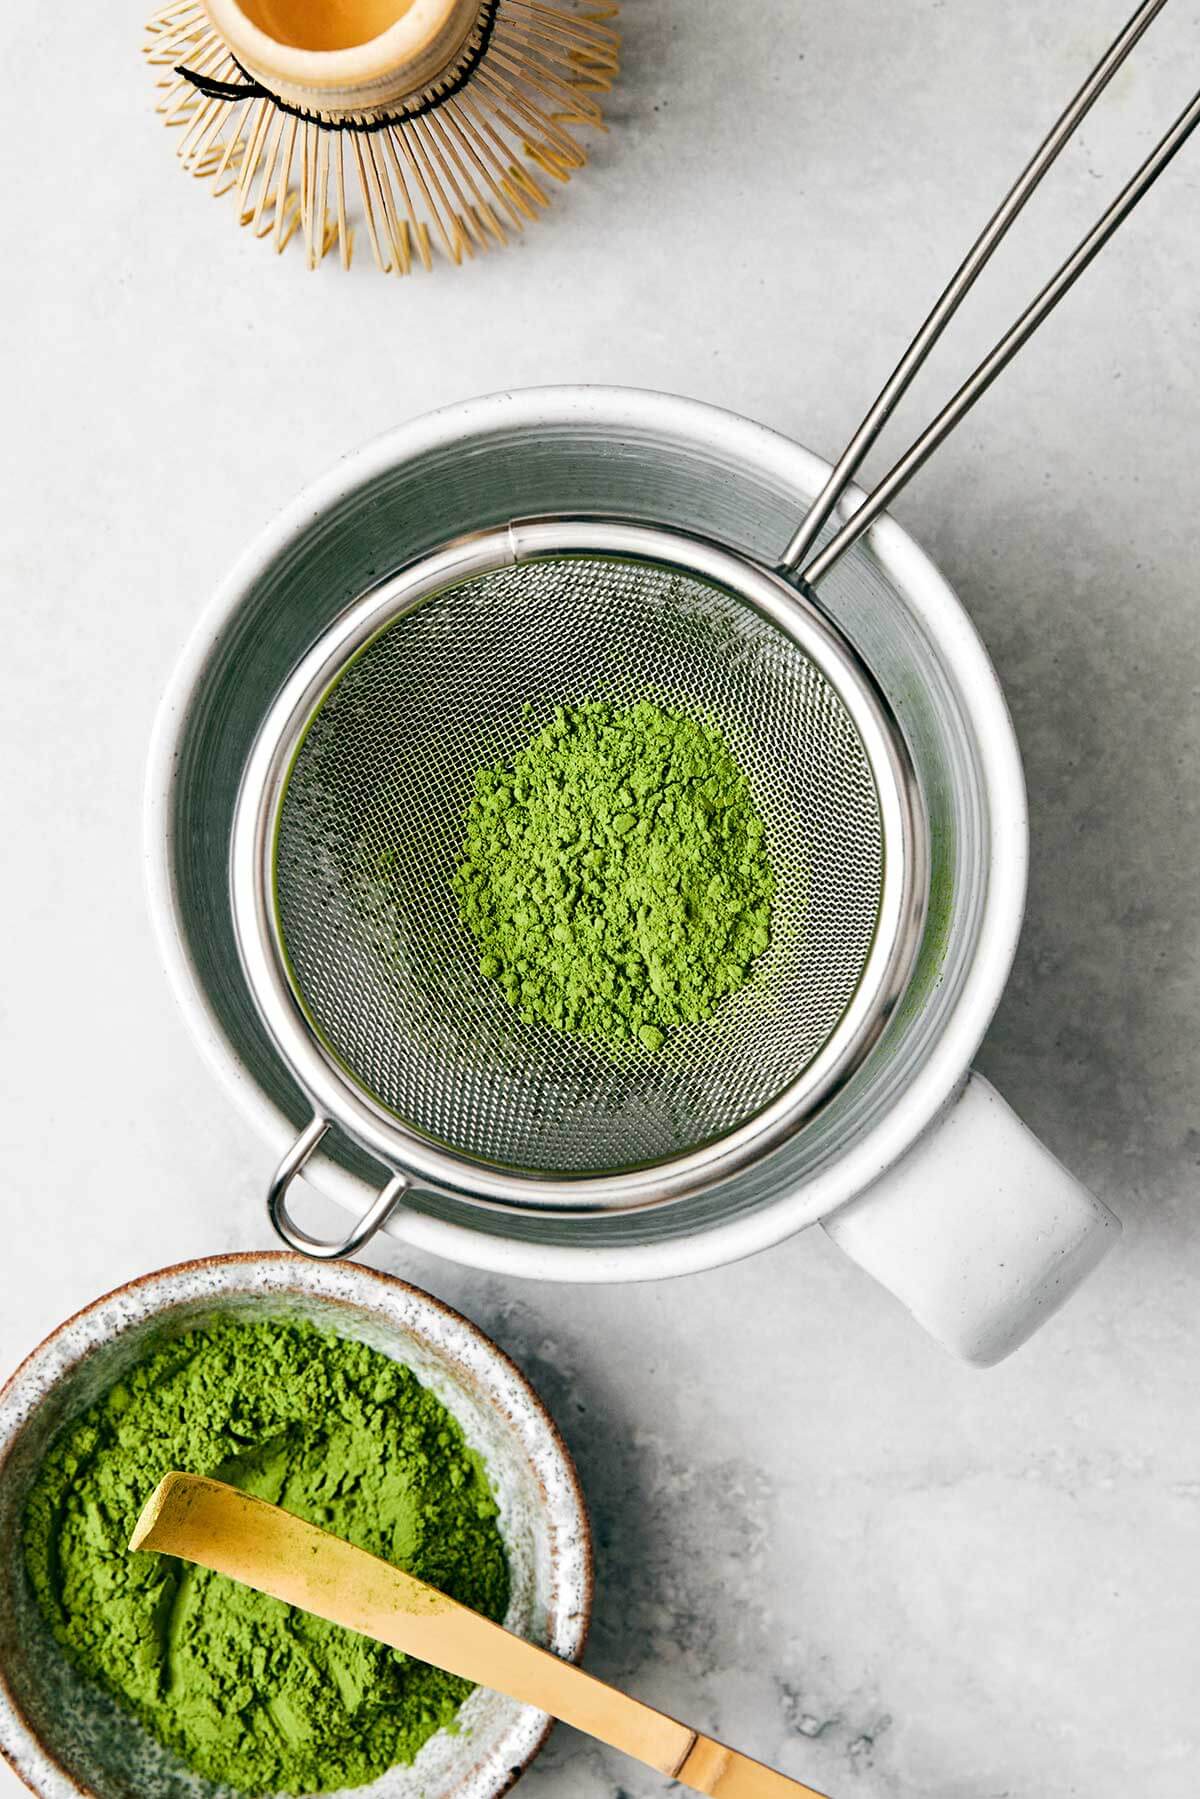 Sifting matcha in a sieve.